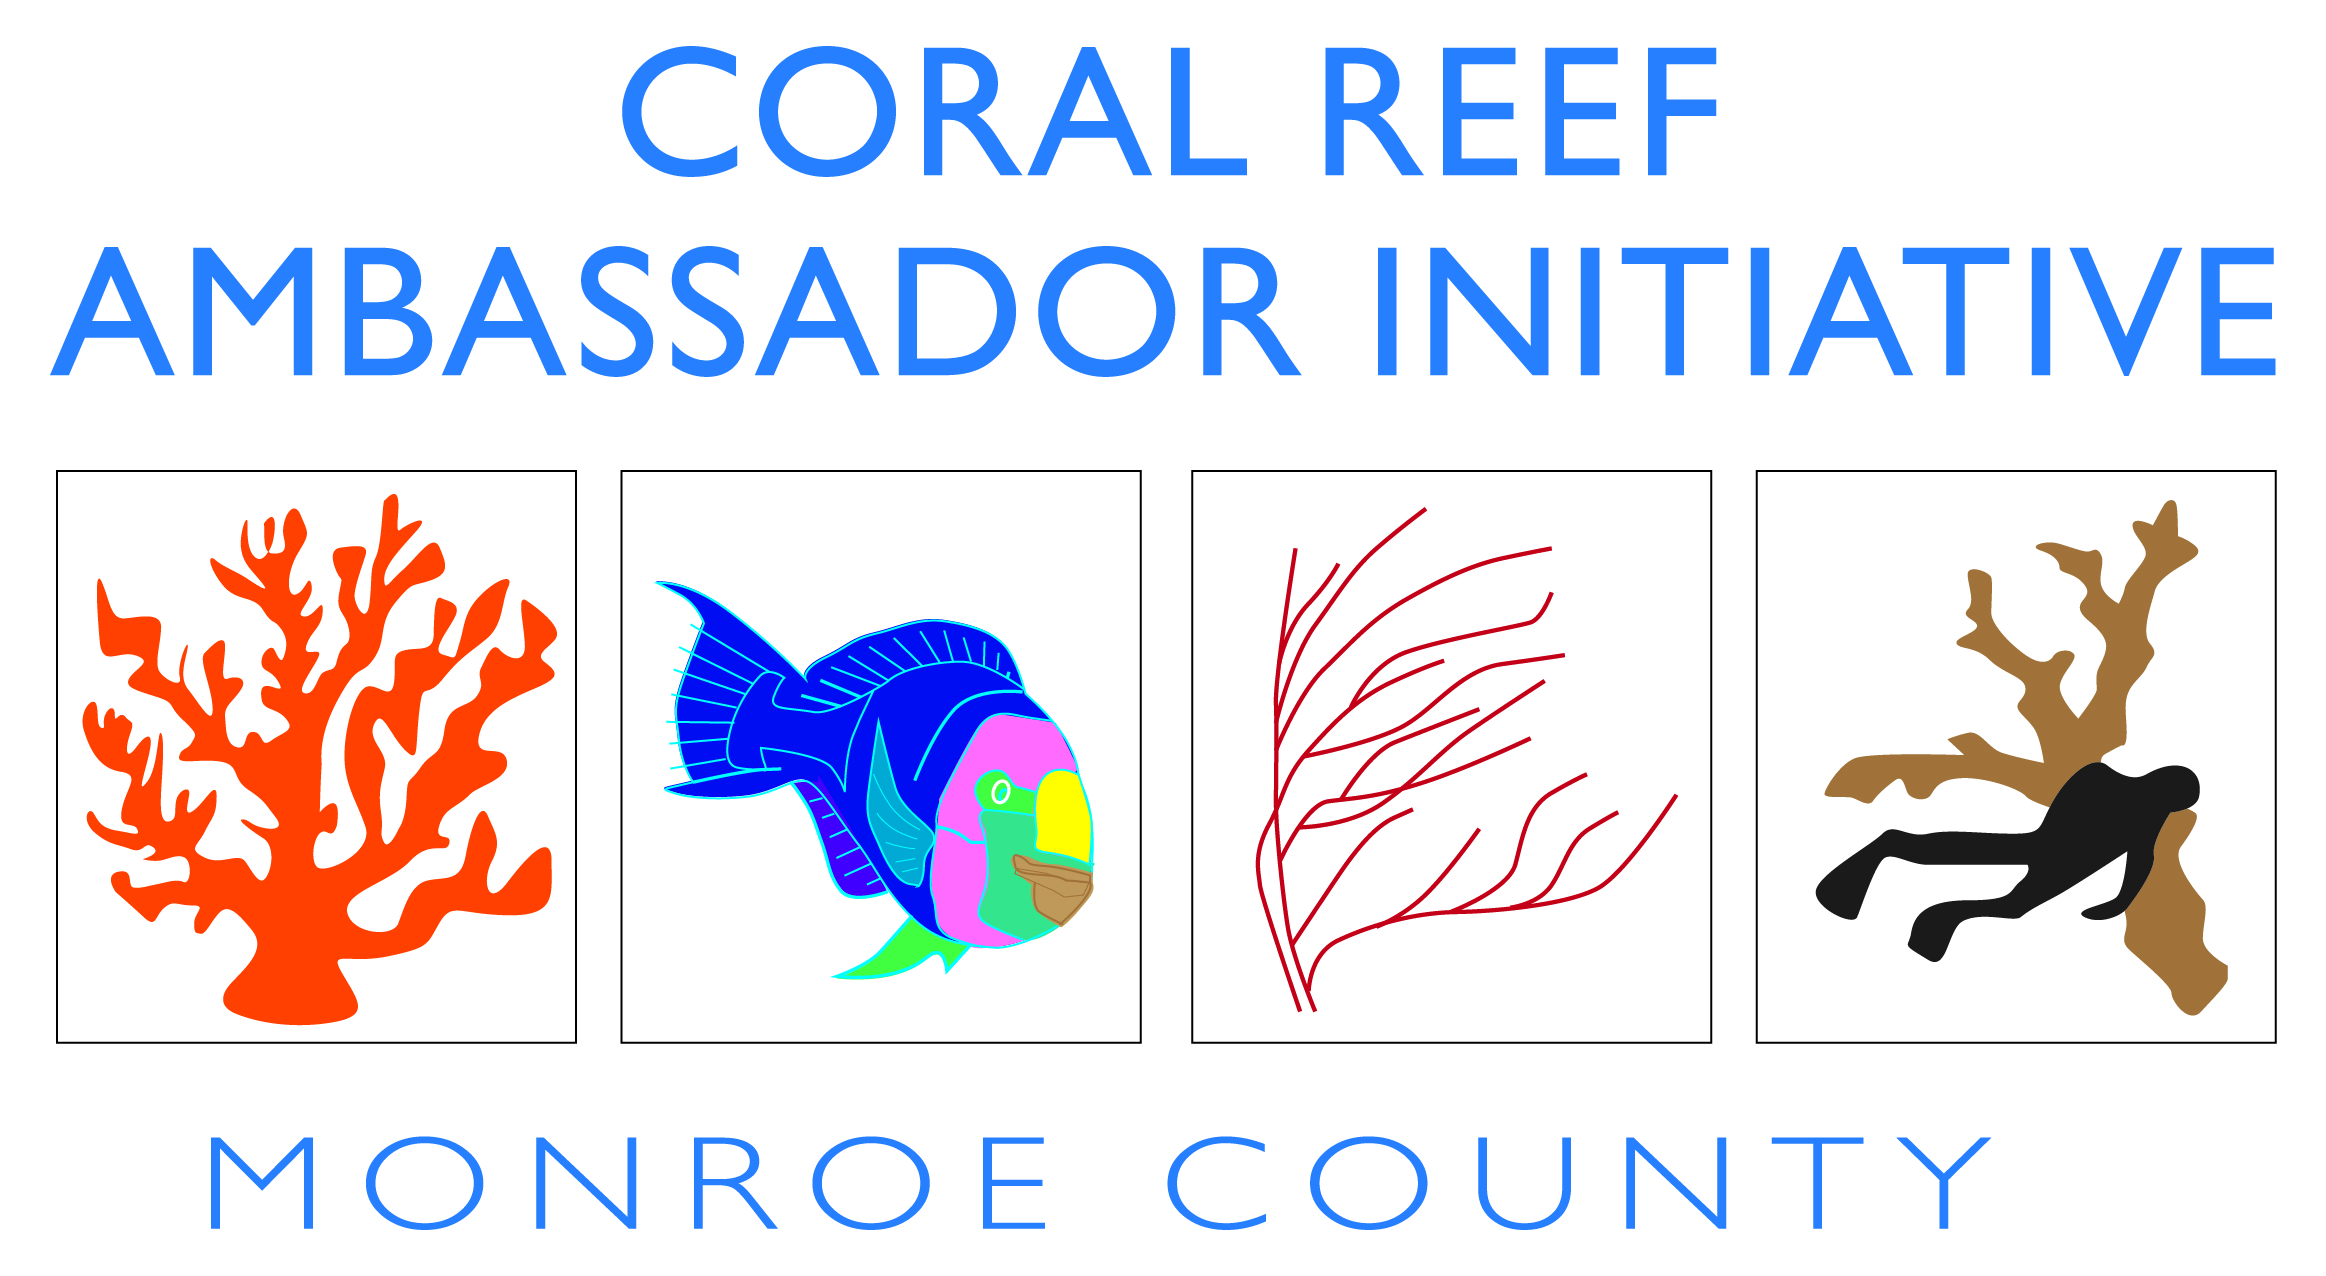 The official logo for the Coral Reef Ambassador Initiative, Monroe County Florida.